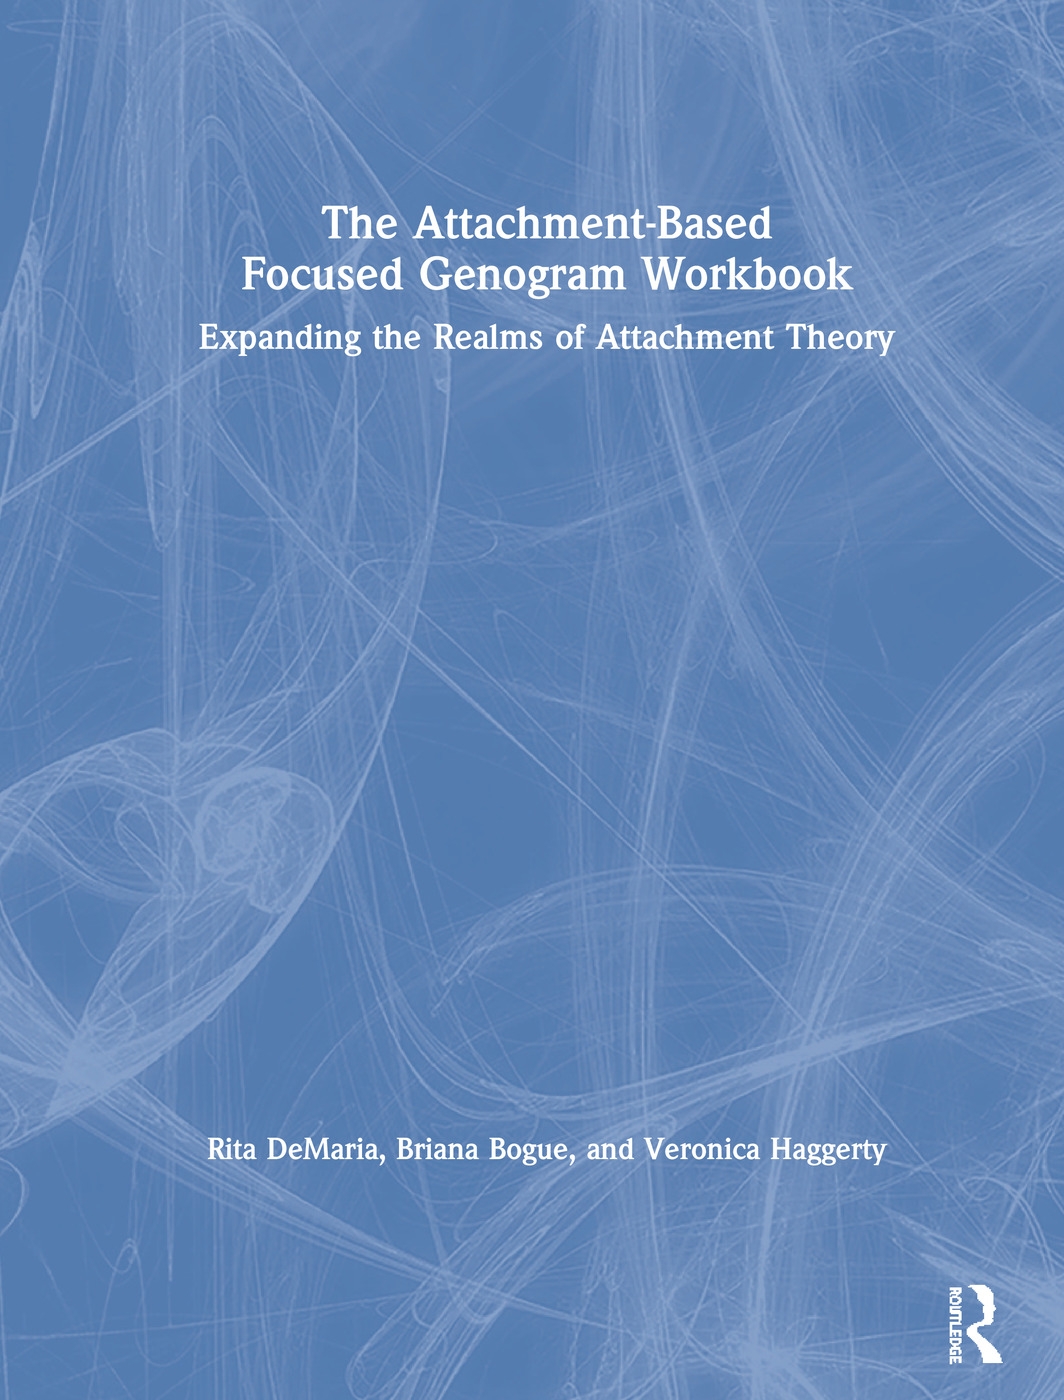 The Attachment-based Focused Genogram Workbook: Expanding the Realms of Attachment Theory